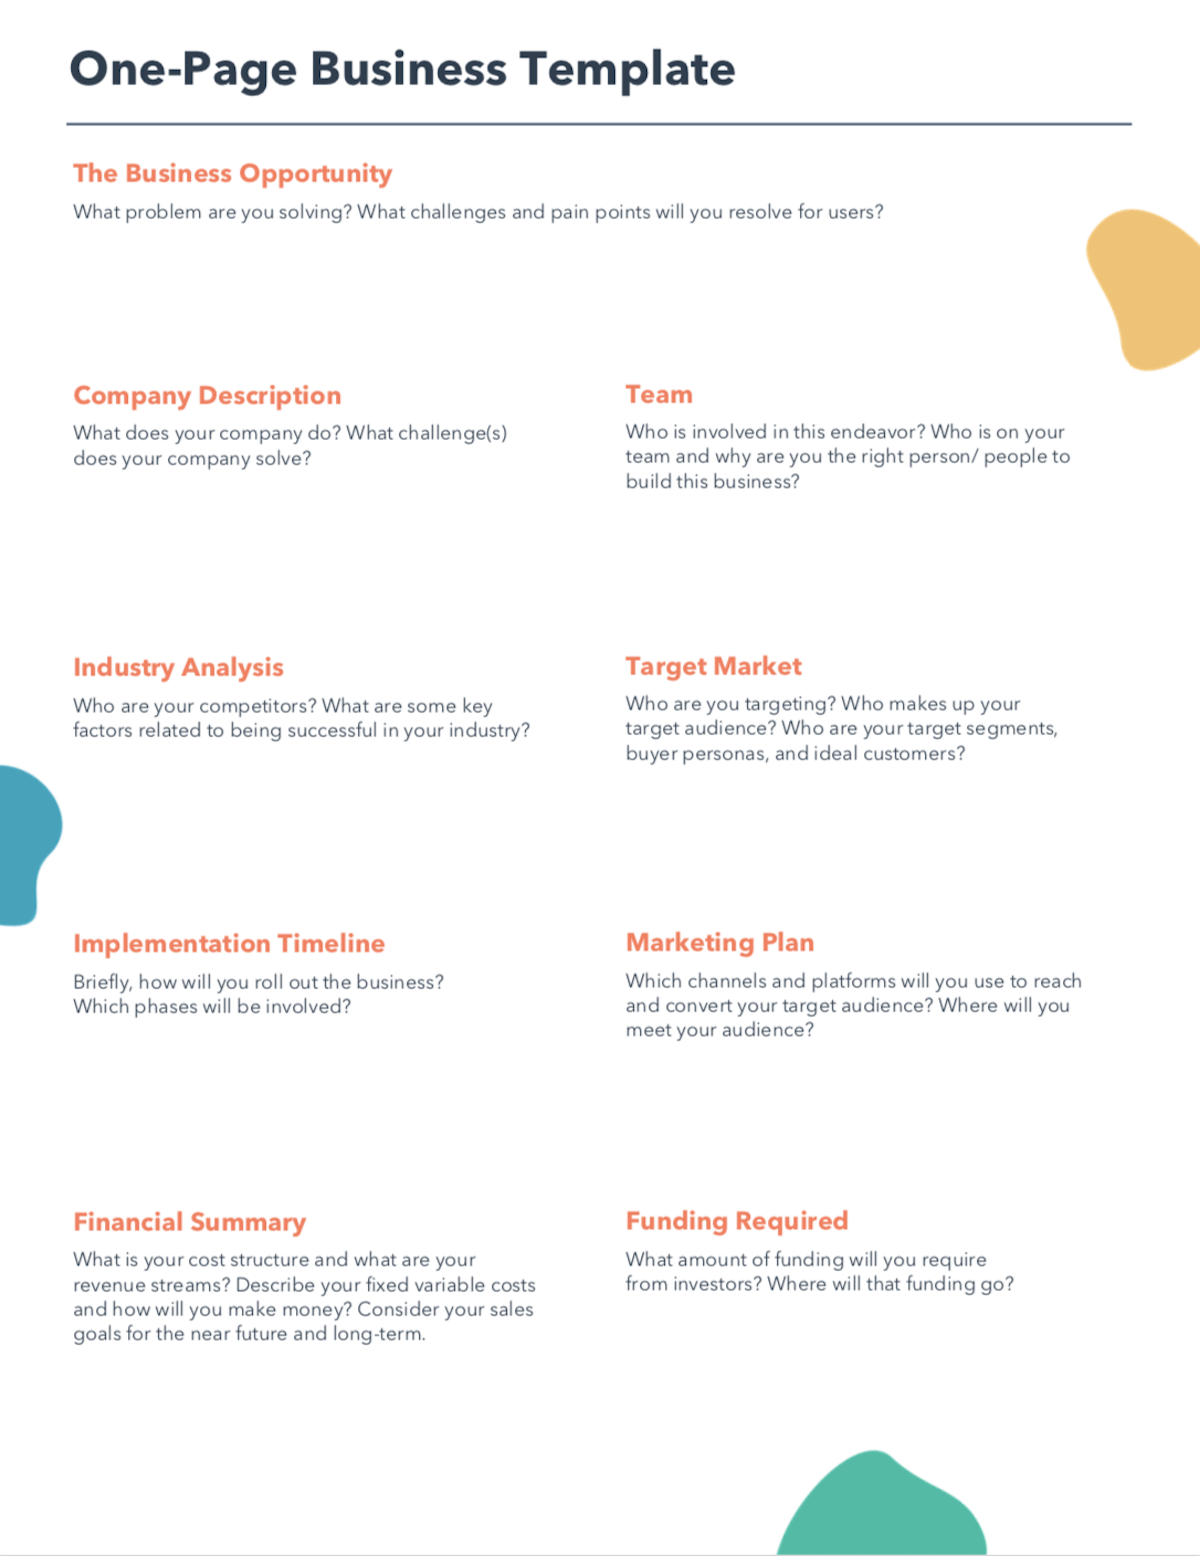 Free One Page Business Plan Template for PDF  Word  HubSpot Within Social Media Marketing Business Plan Template